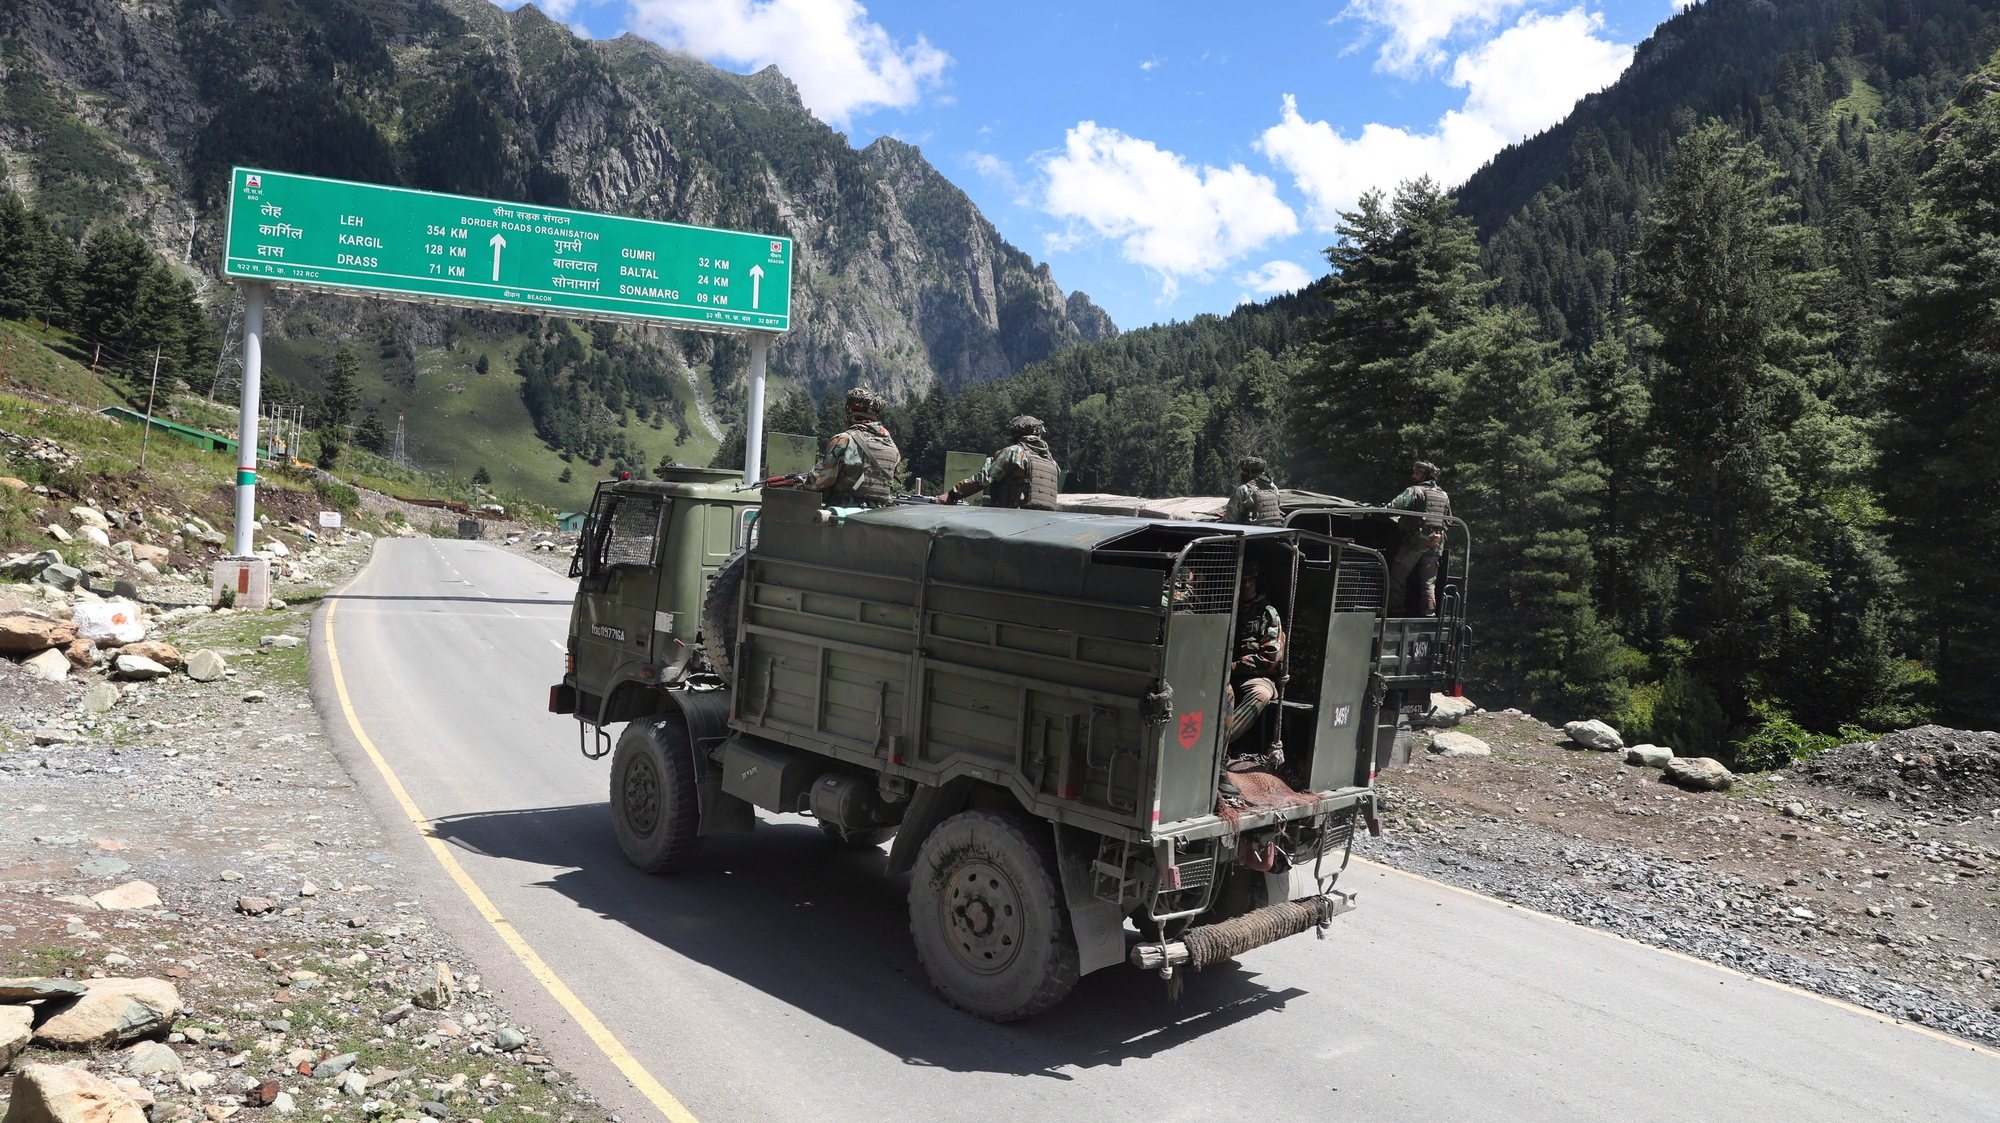 epa08658802 Indian army vehicles move along a highway leading to Ladakh, at Gagangeer some 81 kilometers from Srinagar, the summer capital of Indian Kashmir, 07 September 2020 (issued 10 September 2020). Apart from nomadic families with goats, sheep and horses, no one is allowed to travel along the normally bustling mountain road to allow the Indian military to operate freely amid a months-long standoff between India and China along the disputed border in eastern Ladakh.  EPA/FAROOQ KHAN